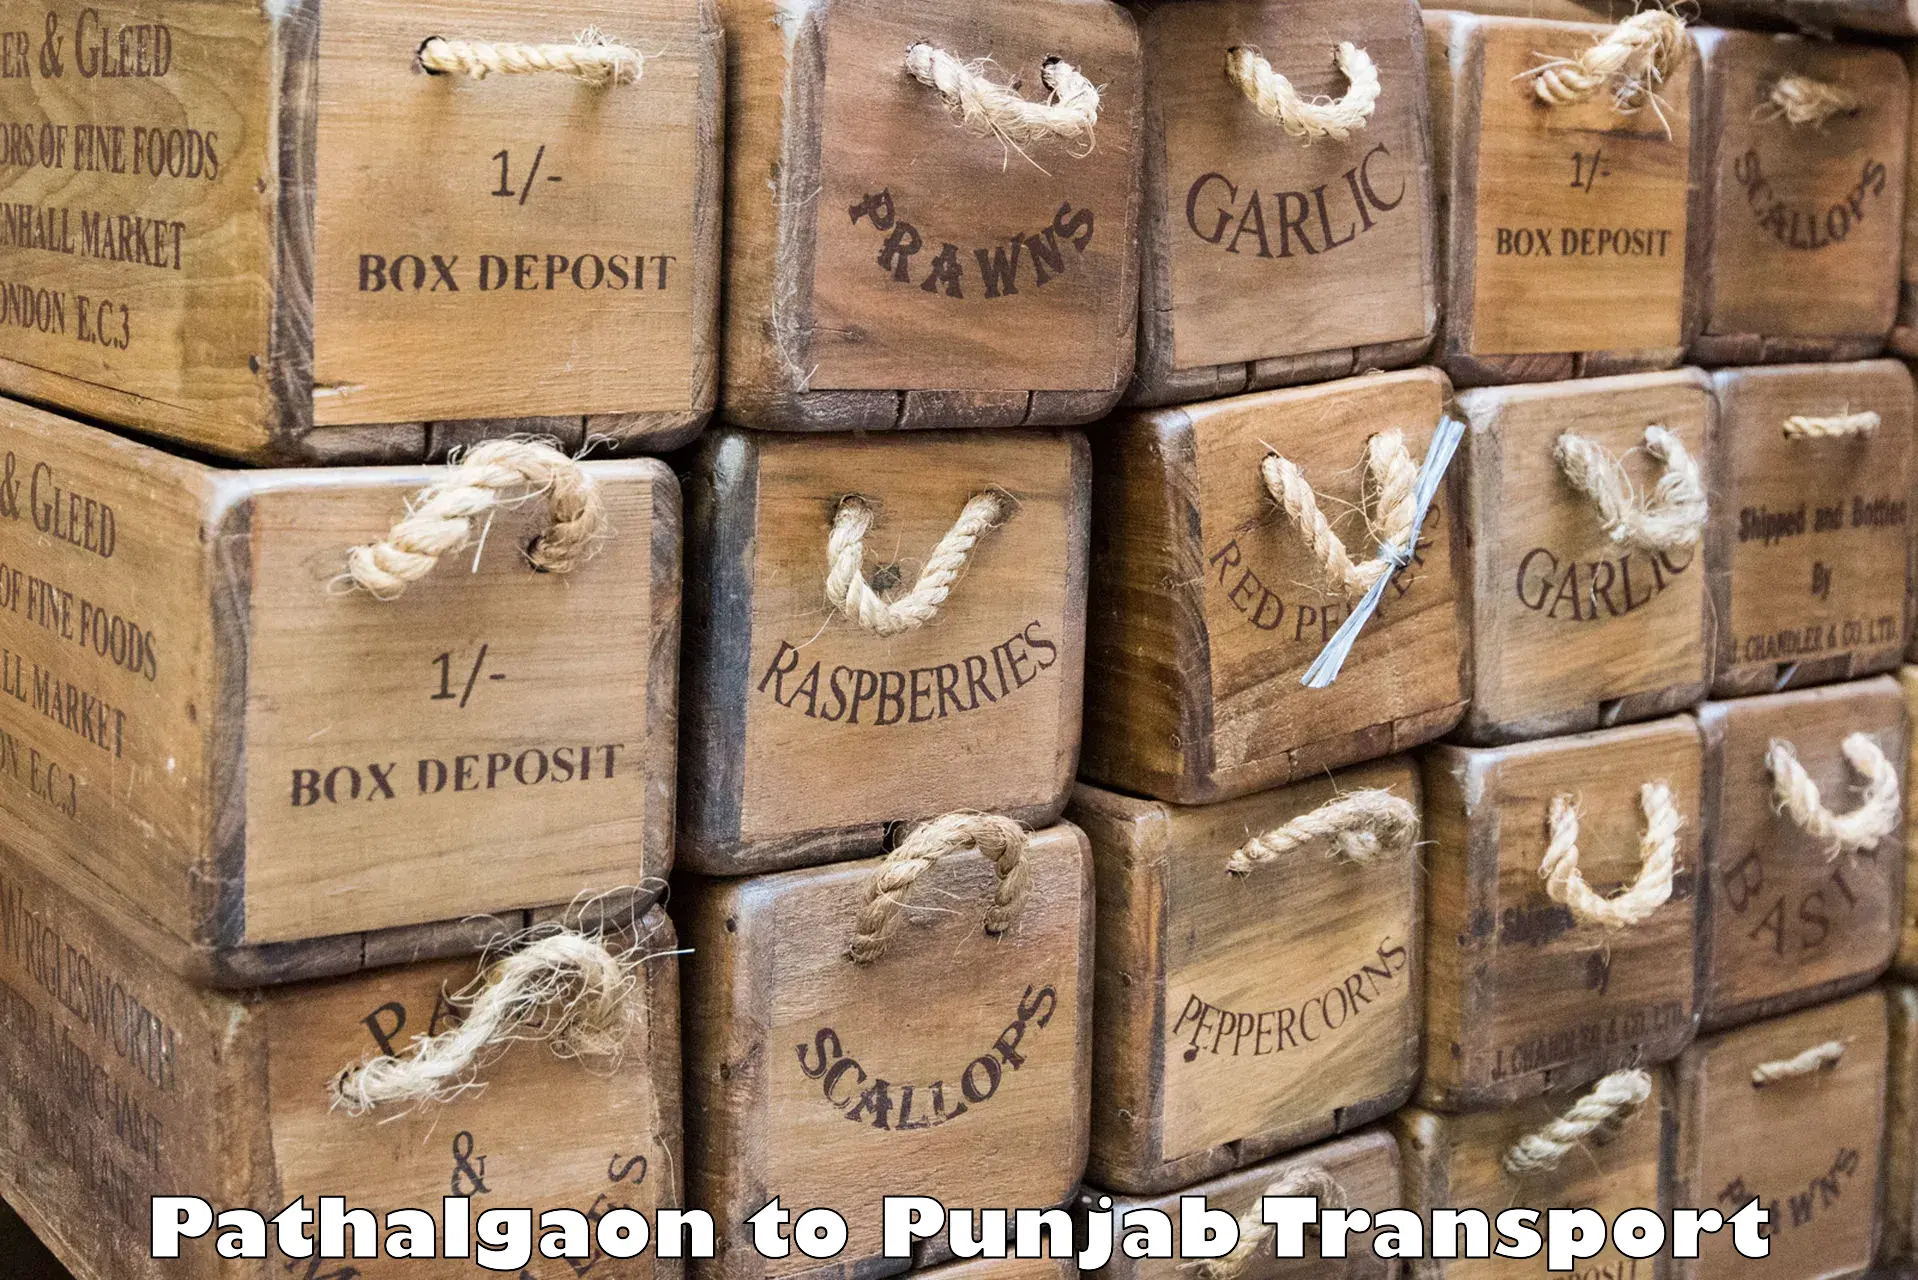 Truck transport companies in India Pathalgaon to Sangrur